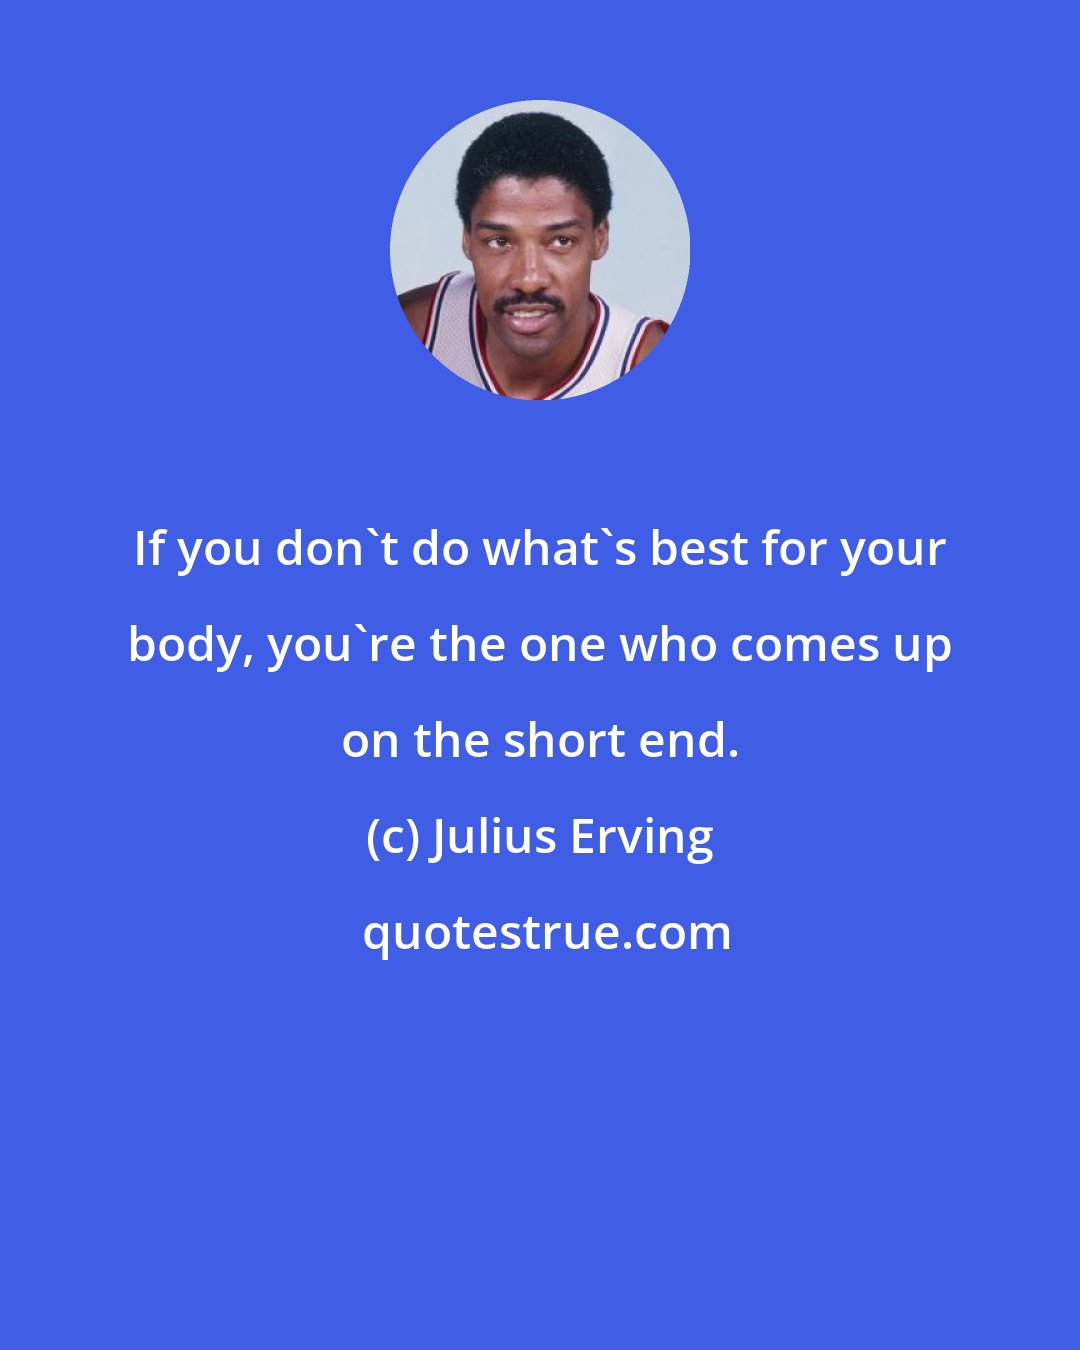 Julius Erving: If you don't do what's best for your body, you're the one who comes up on the short end.